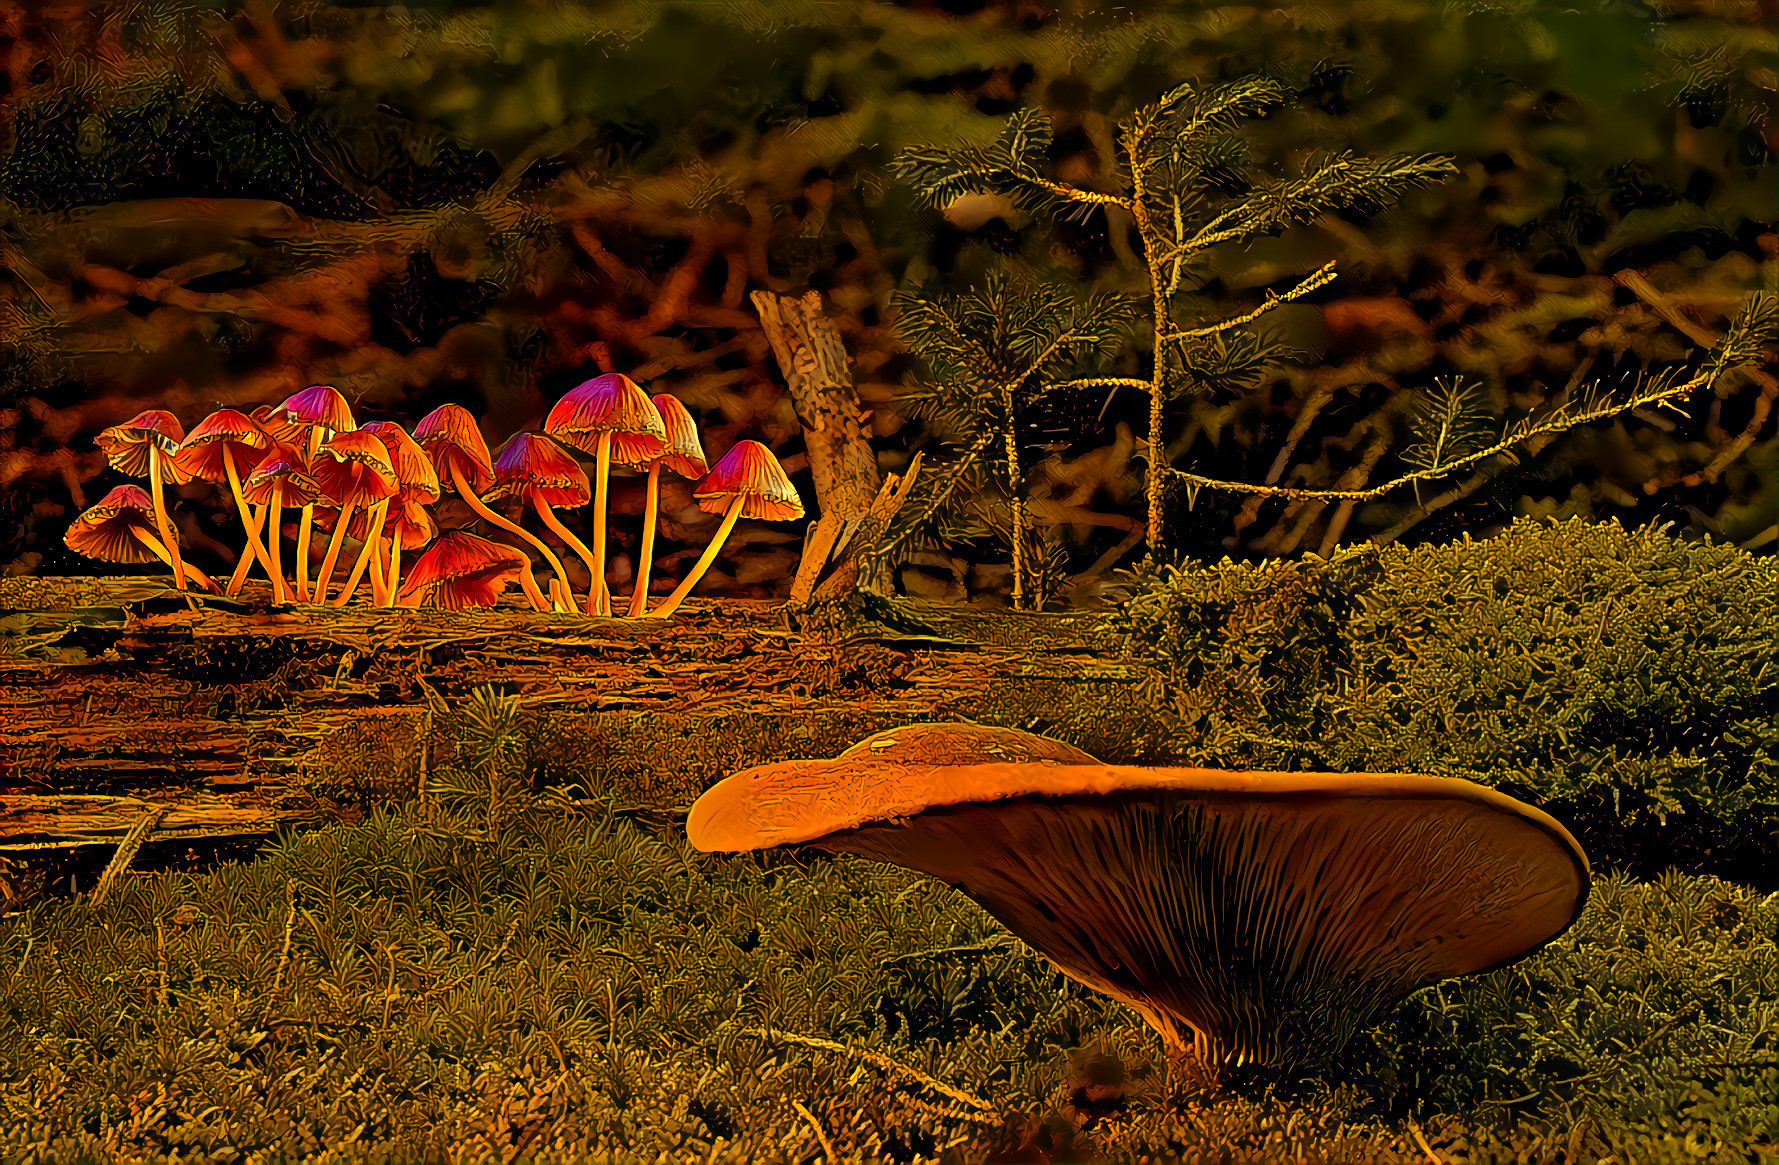 Small red mushrooms & a large one on forest floor